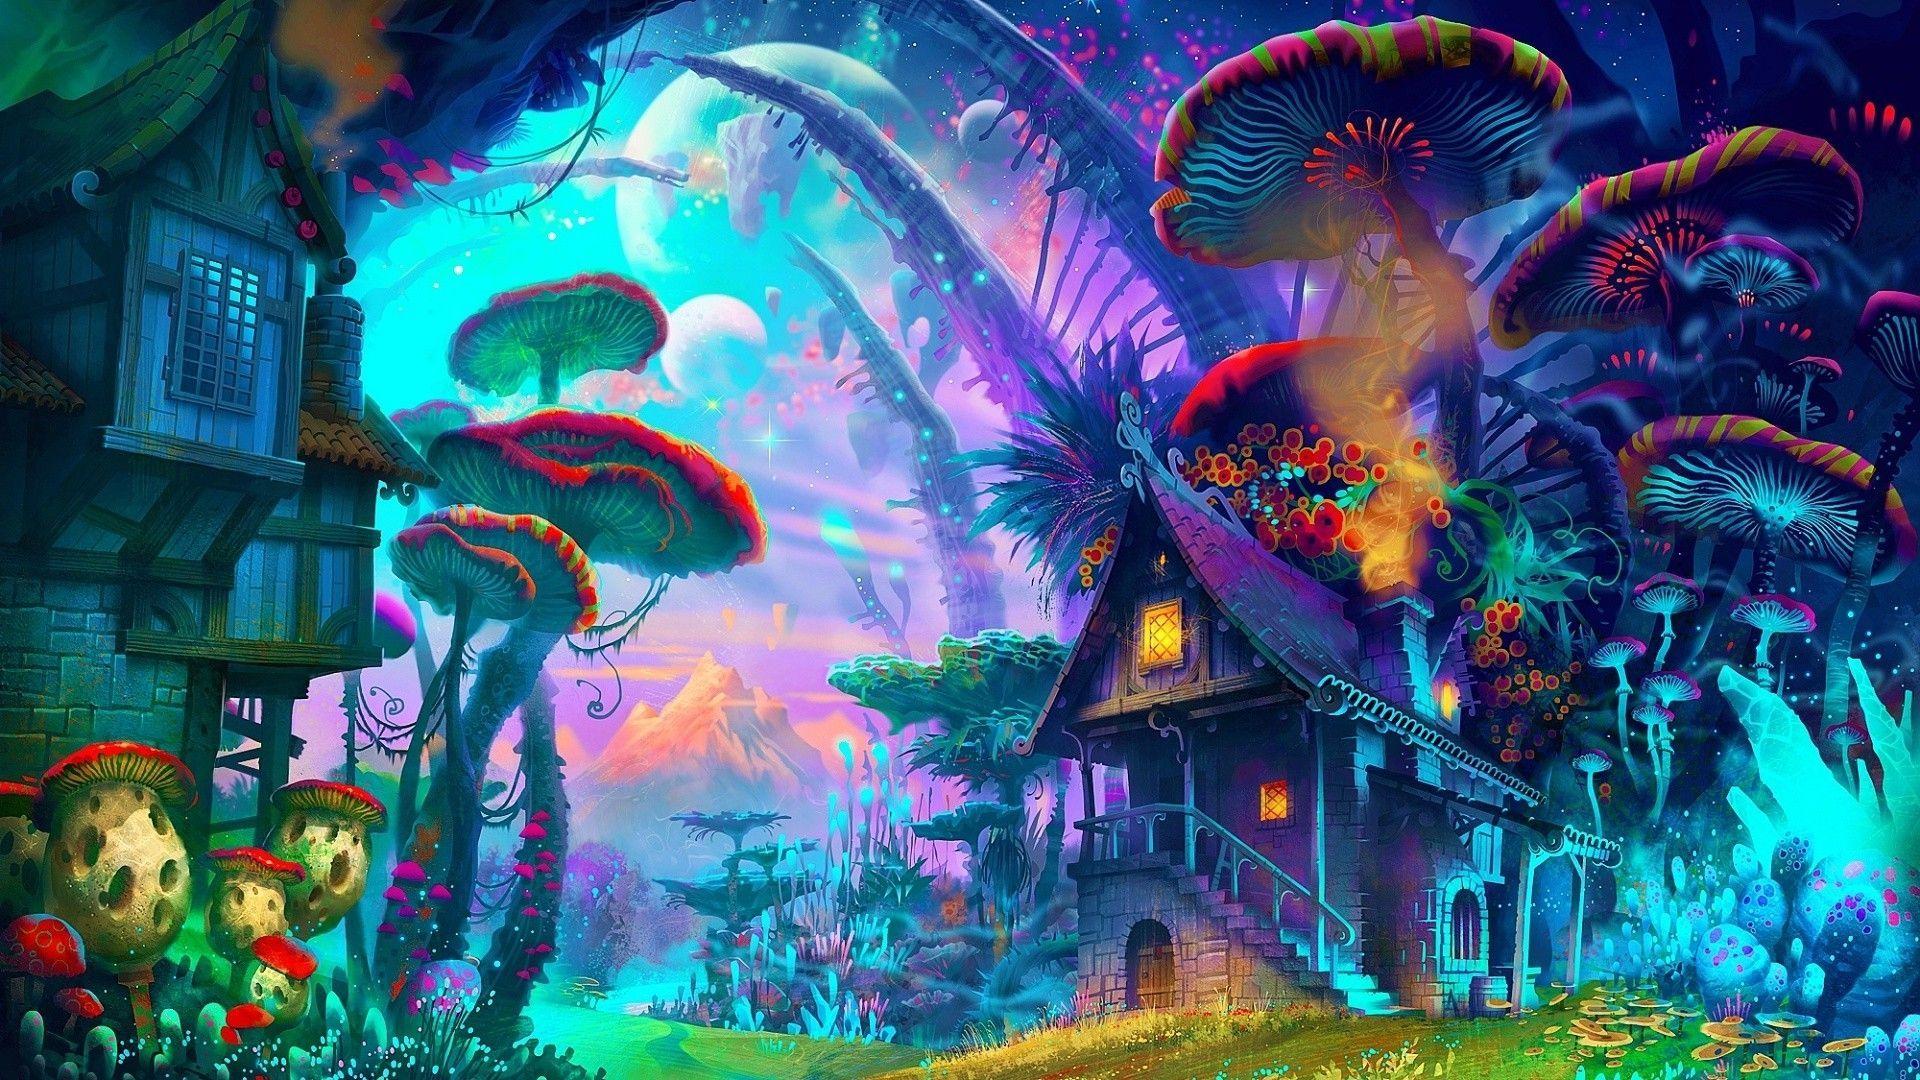 Download HD Wallpaper Of 160755 Fantasy Art, Drawing, Nature, Psychedelic, Colorful, House, Mushroom, Planet. Nature Art Drawings, Psychedelic Art, Art Wallpaper